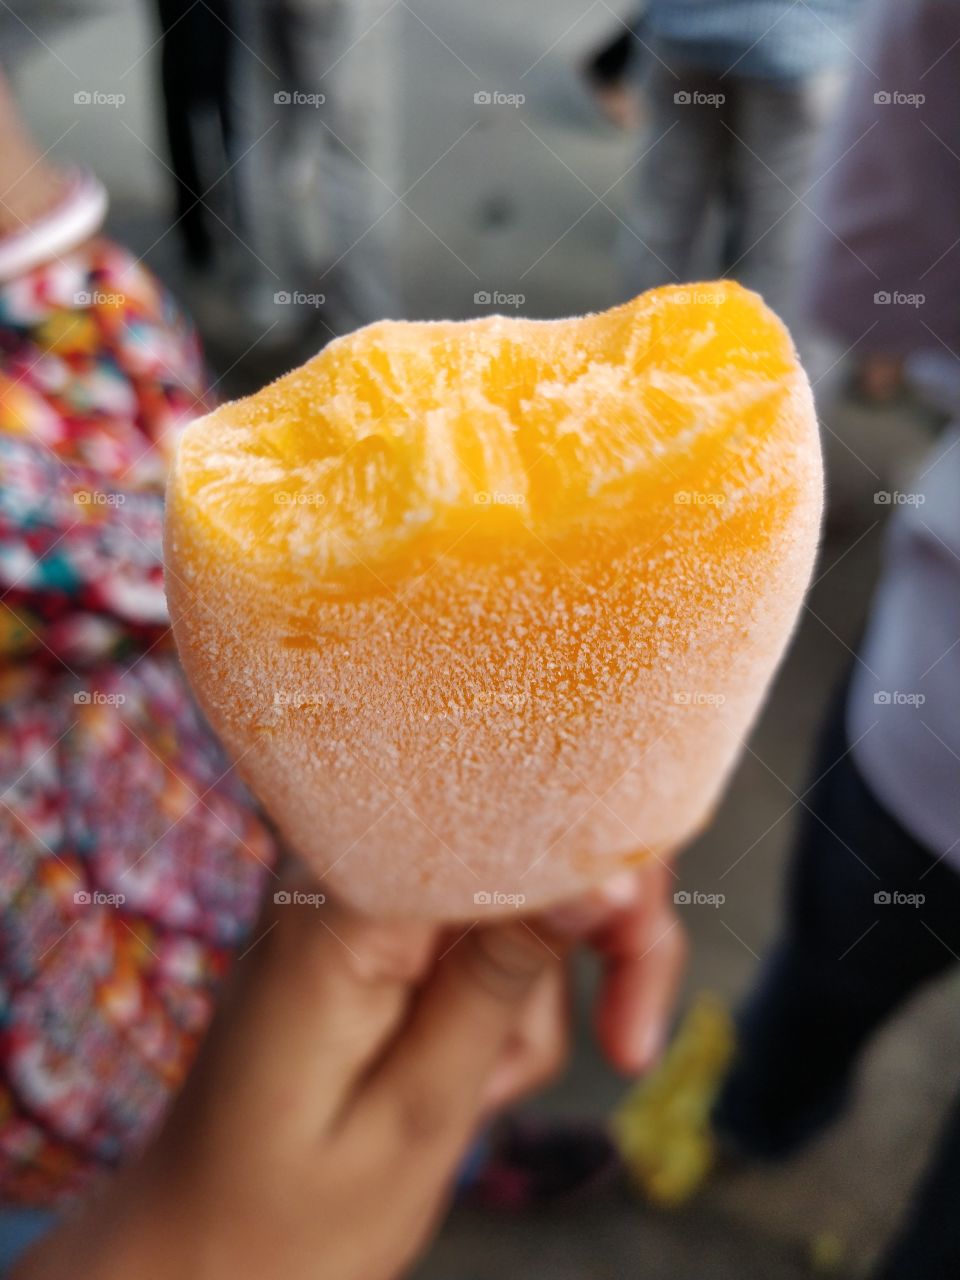 on a hot sunny day, an ice candy makes the day